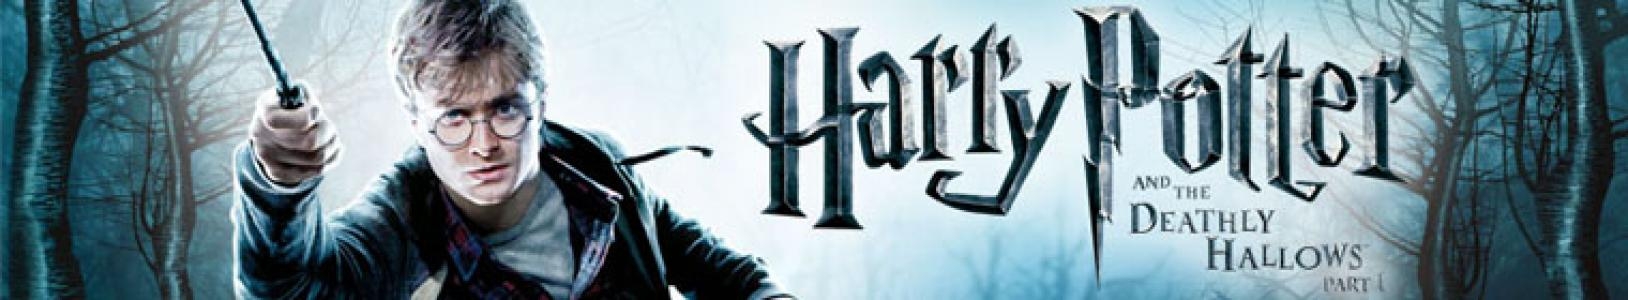 Harry Potter and the Deathly Hallows, Part 1 banner